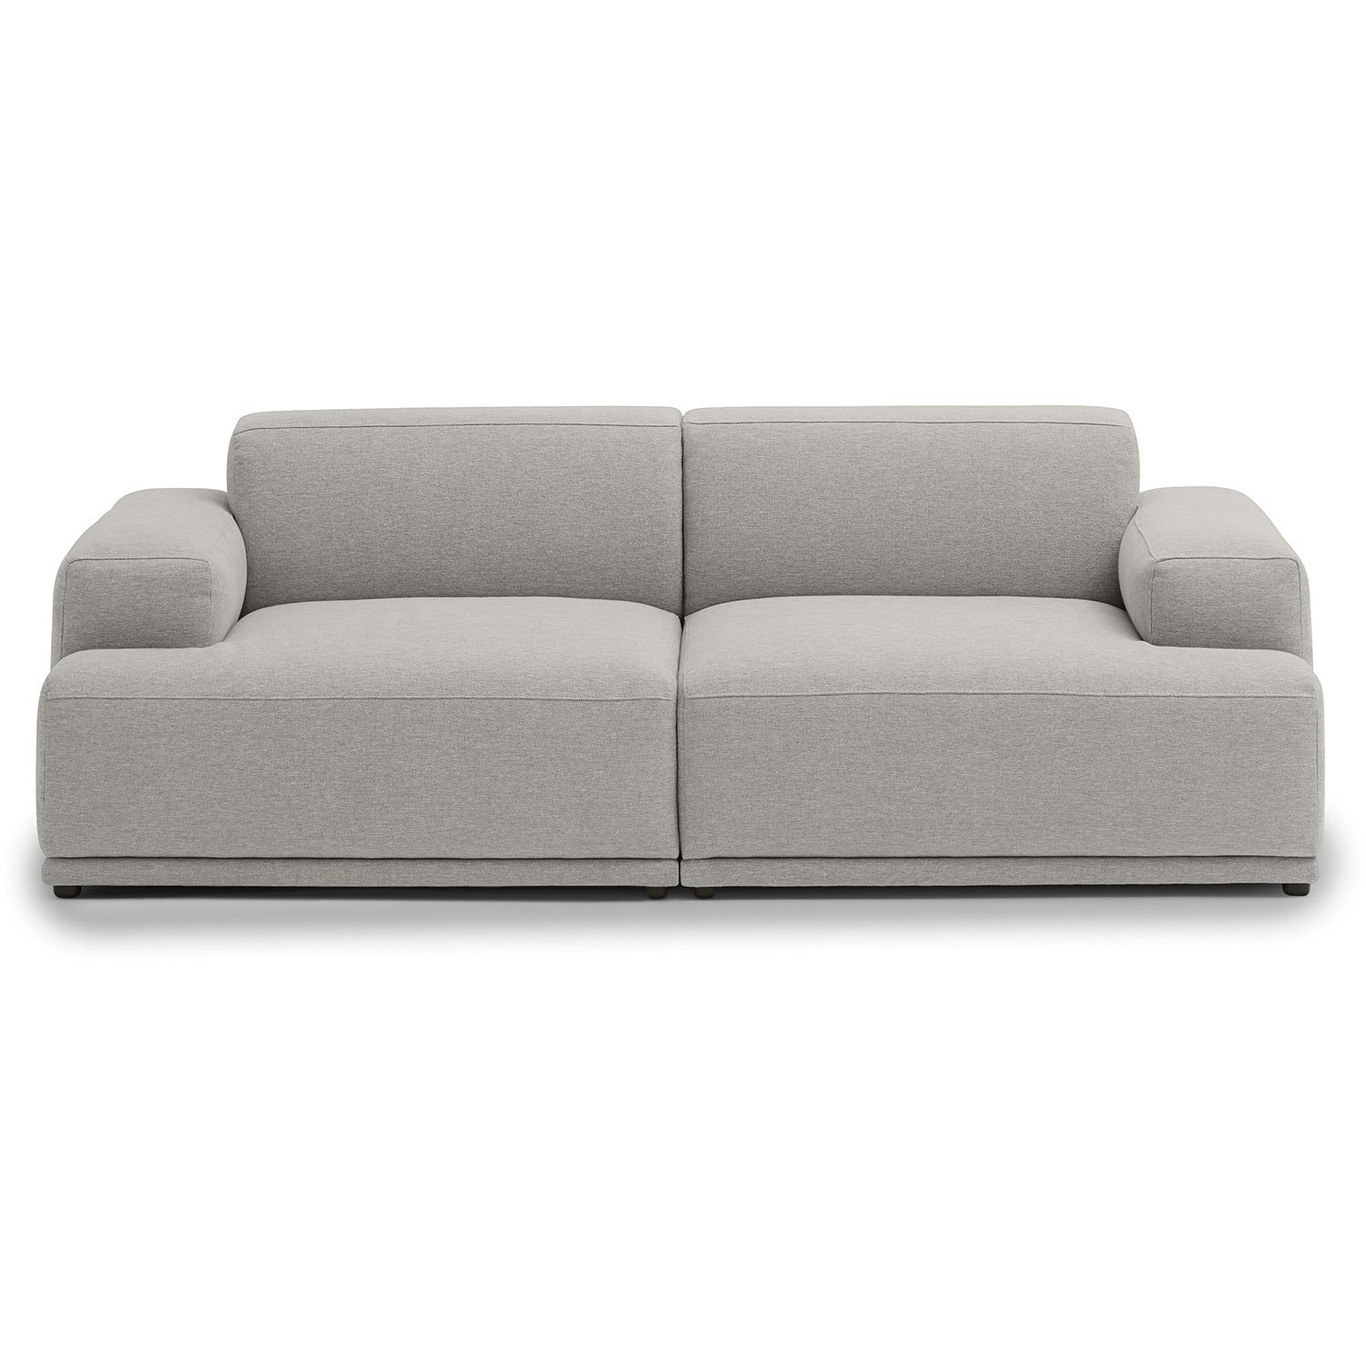 Connect Soft Sofa 2-seters Config 1, Clay 12